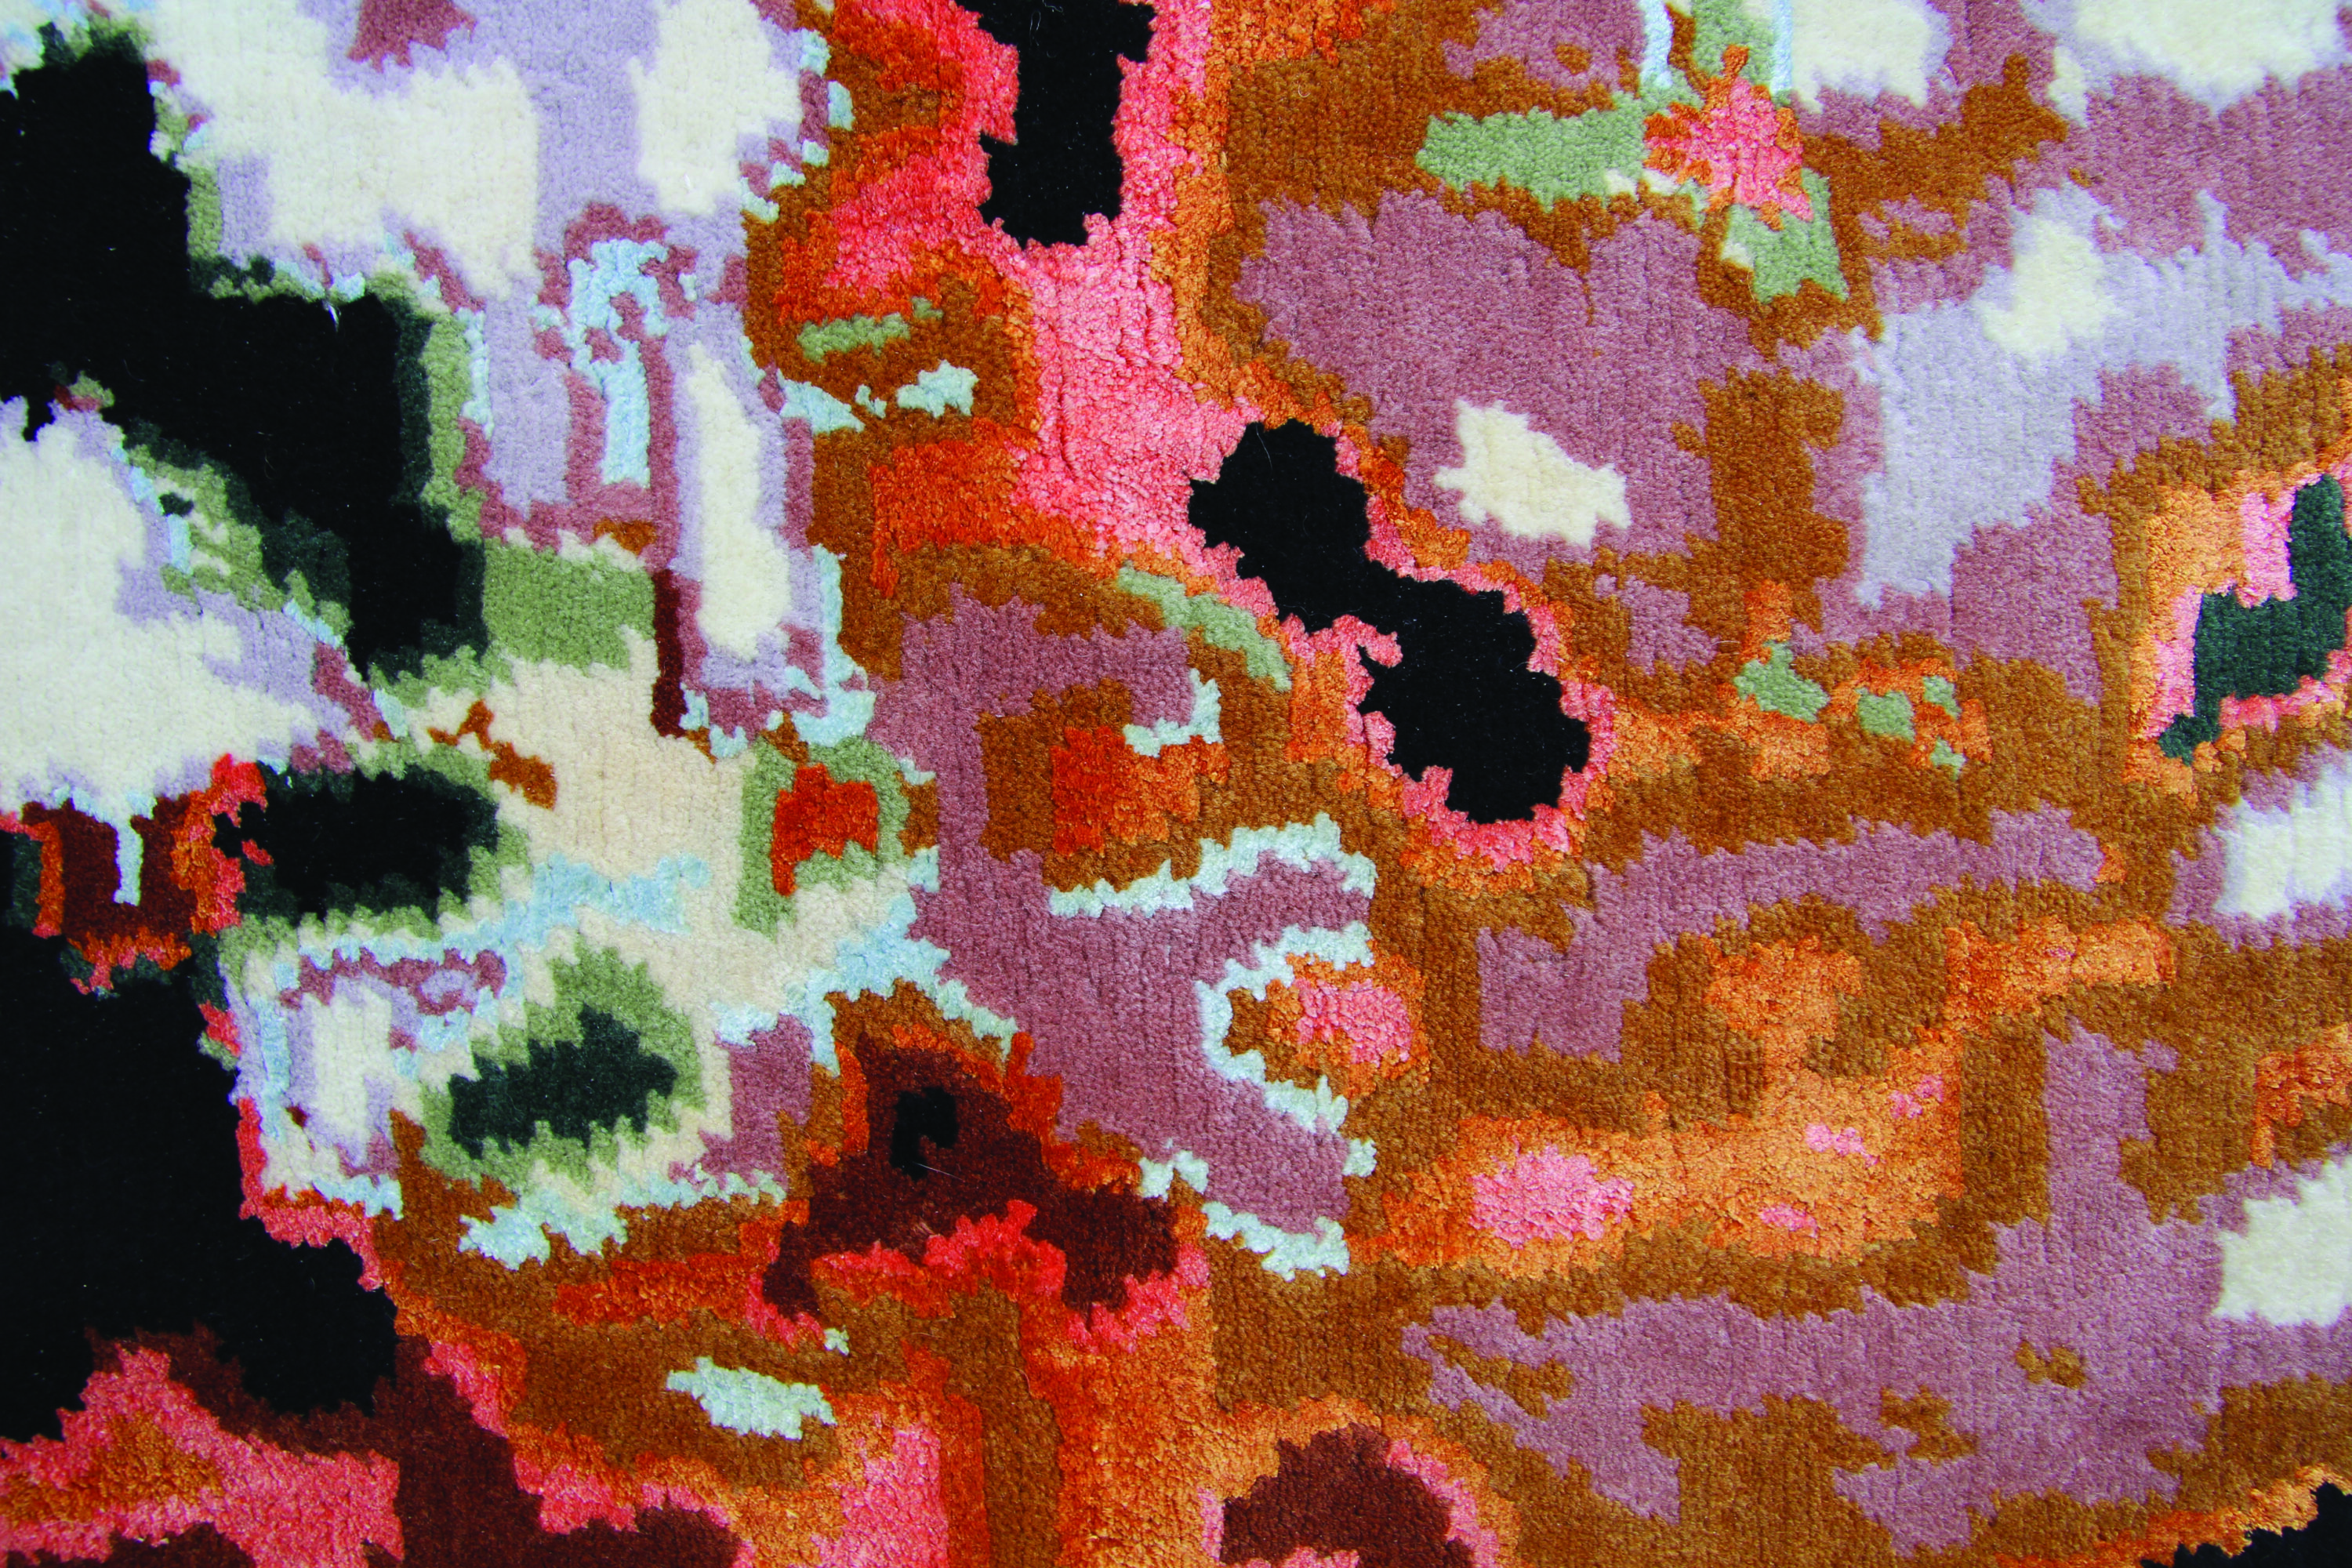 An up-close image of a plush tapestry woven with wool and silk. The colorful, abstract pattern on the tapestry looks like a pixelated image. Its organic shapes resemble a satellite image of the weather, but the pattern is woven in peaches, oranges, blacks, and very light blues.